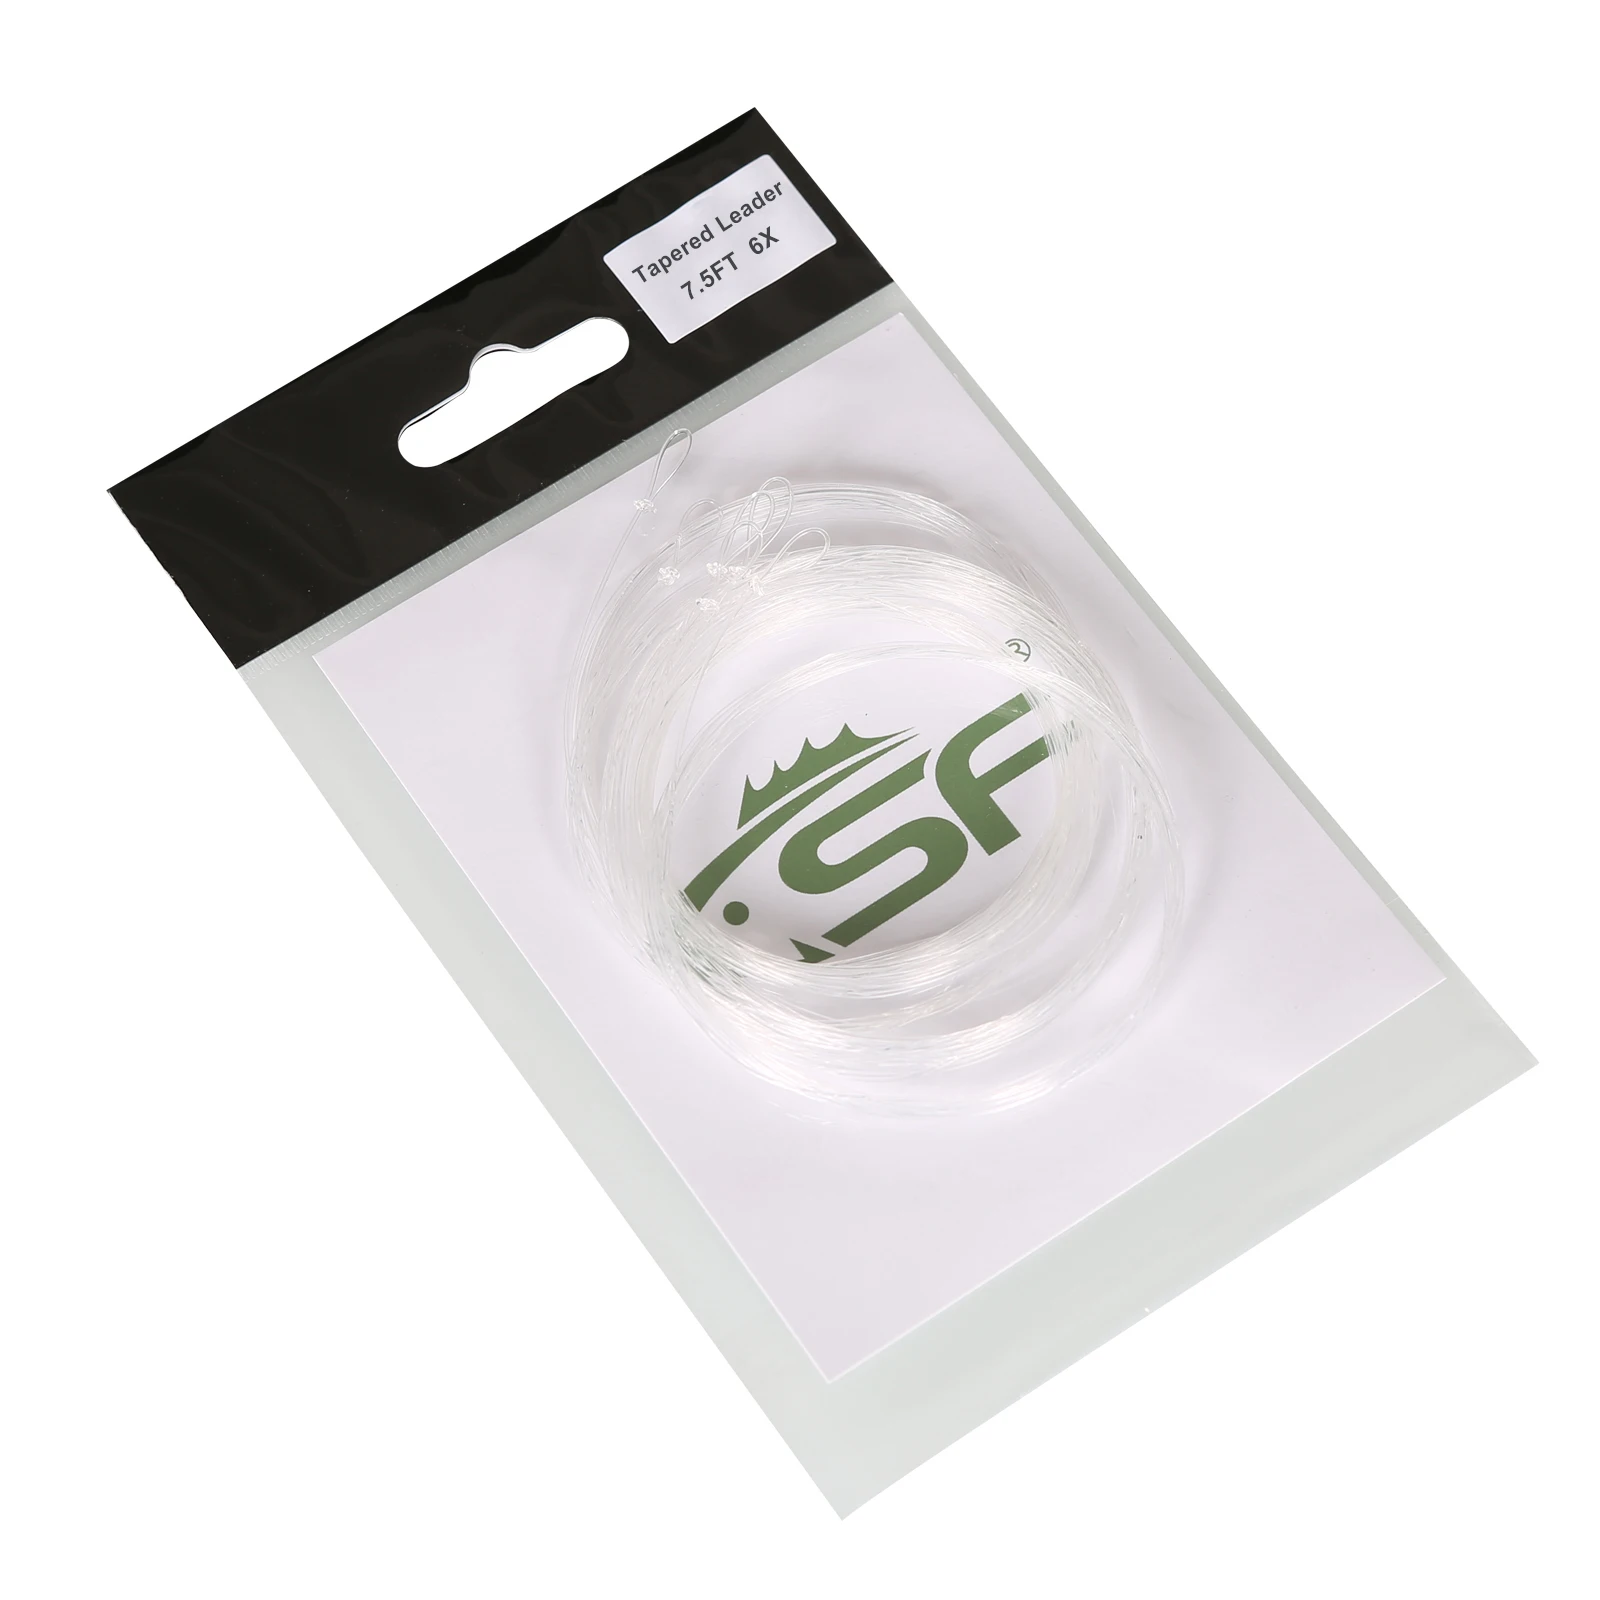 

6 SF 9FT-6X Clear Nylon Fly Fishing Line knotless Leaders Tapered Leader